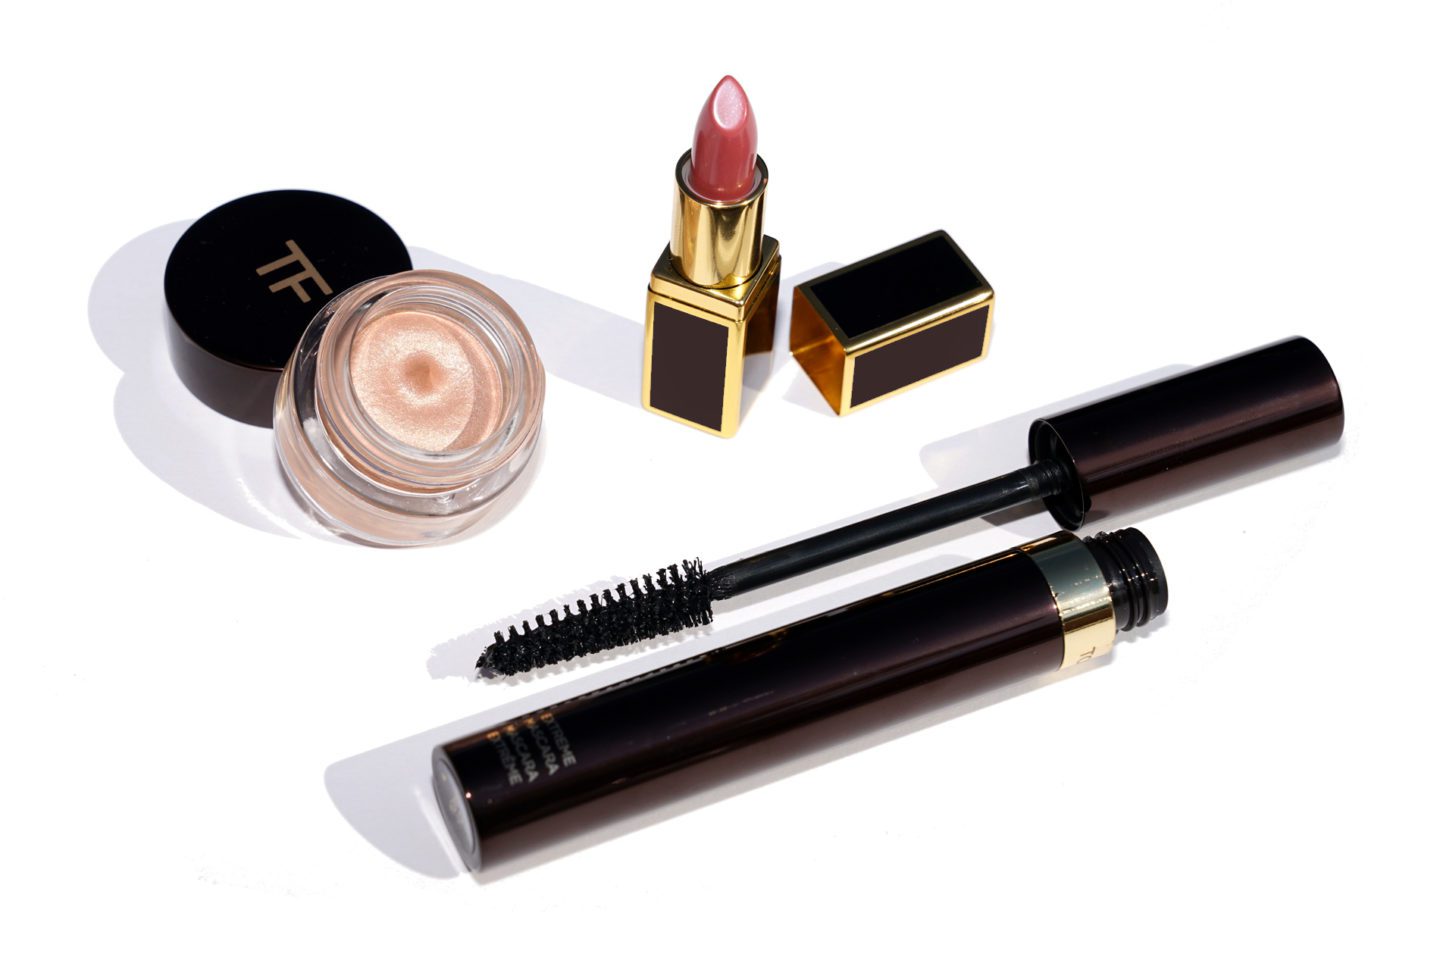 Tom Ford Golden Rose Eye Lip Set Nordstrom Anniversary Sale | The Beauty Look Book